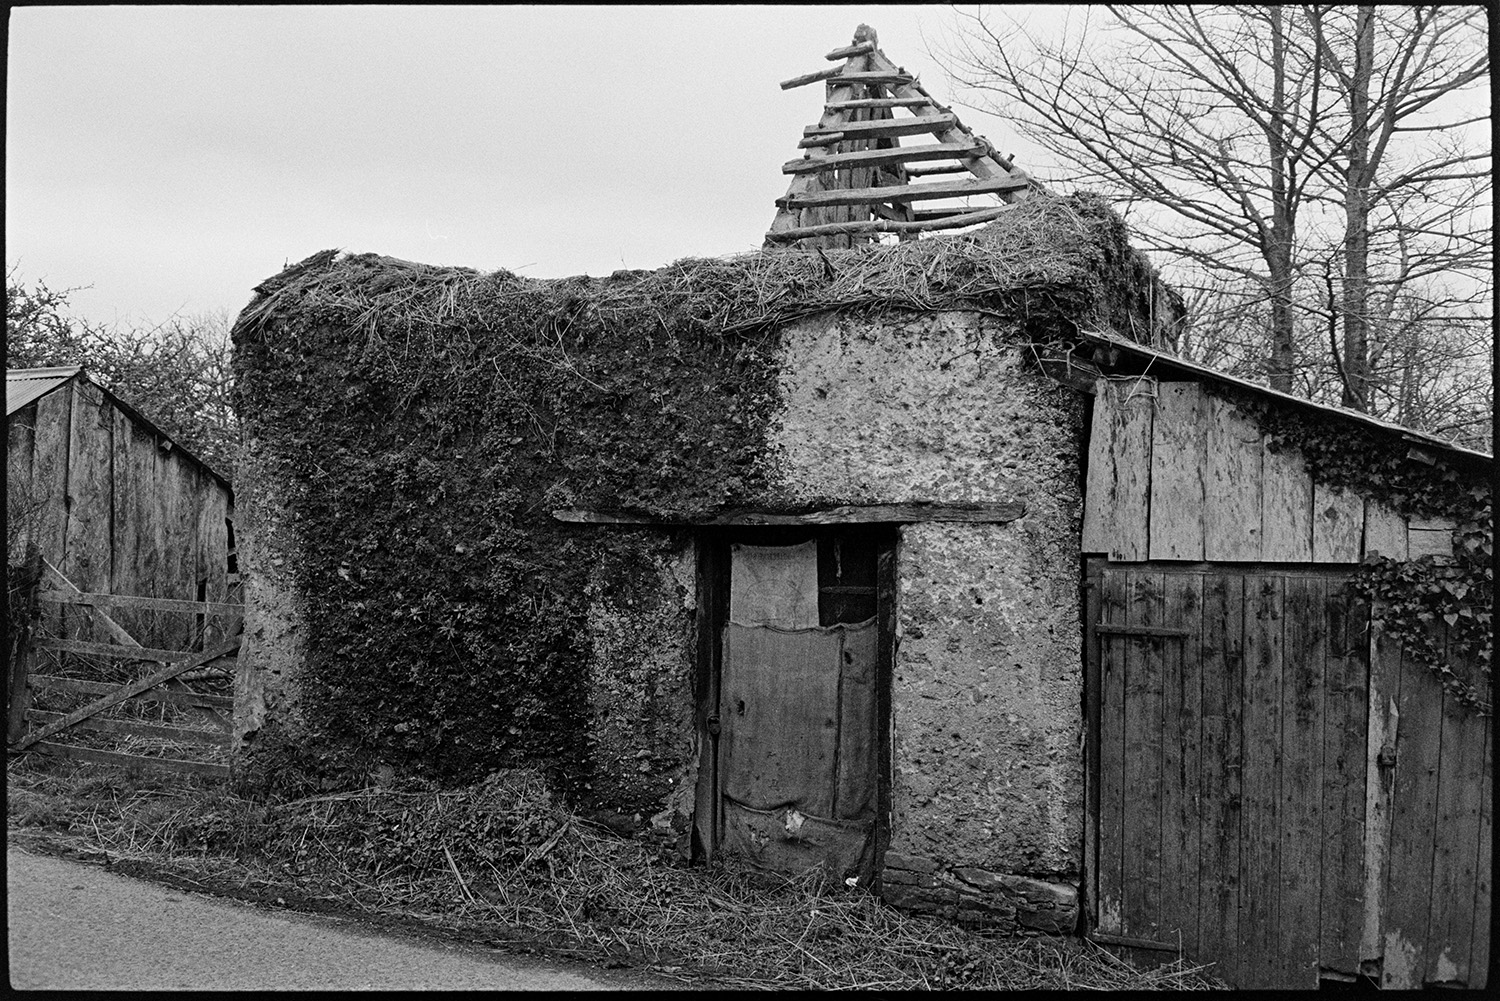 Roofless cob barn decaying detail of cob. 
[An overgrown ruined cob barn with exposed roof timbers near Ash, Monkokehampton. The doorway is covered with sacking.]